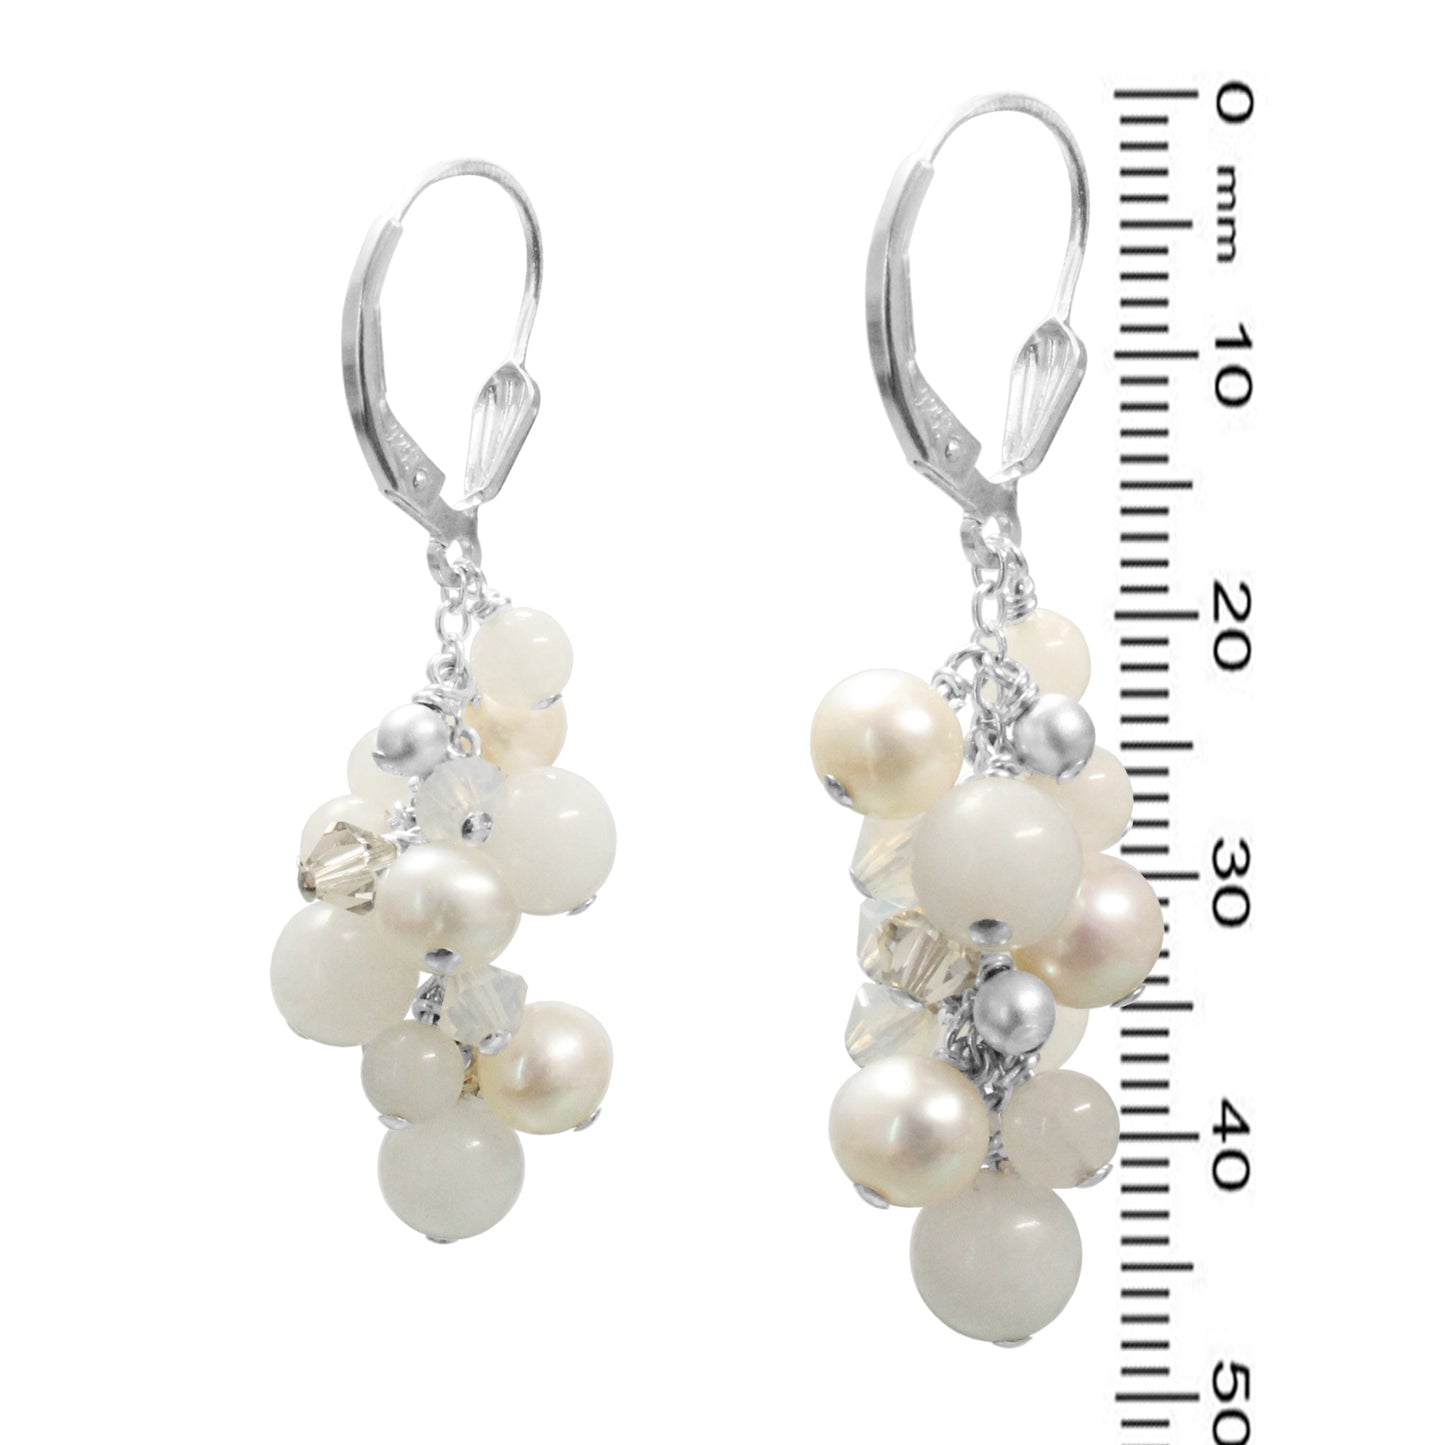 White Cascade Earrings / 48mm length / snow jade, pearls and crystal, sterling silver leverback earwires